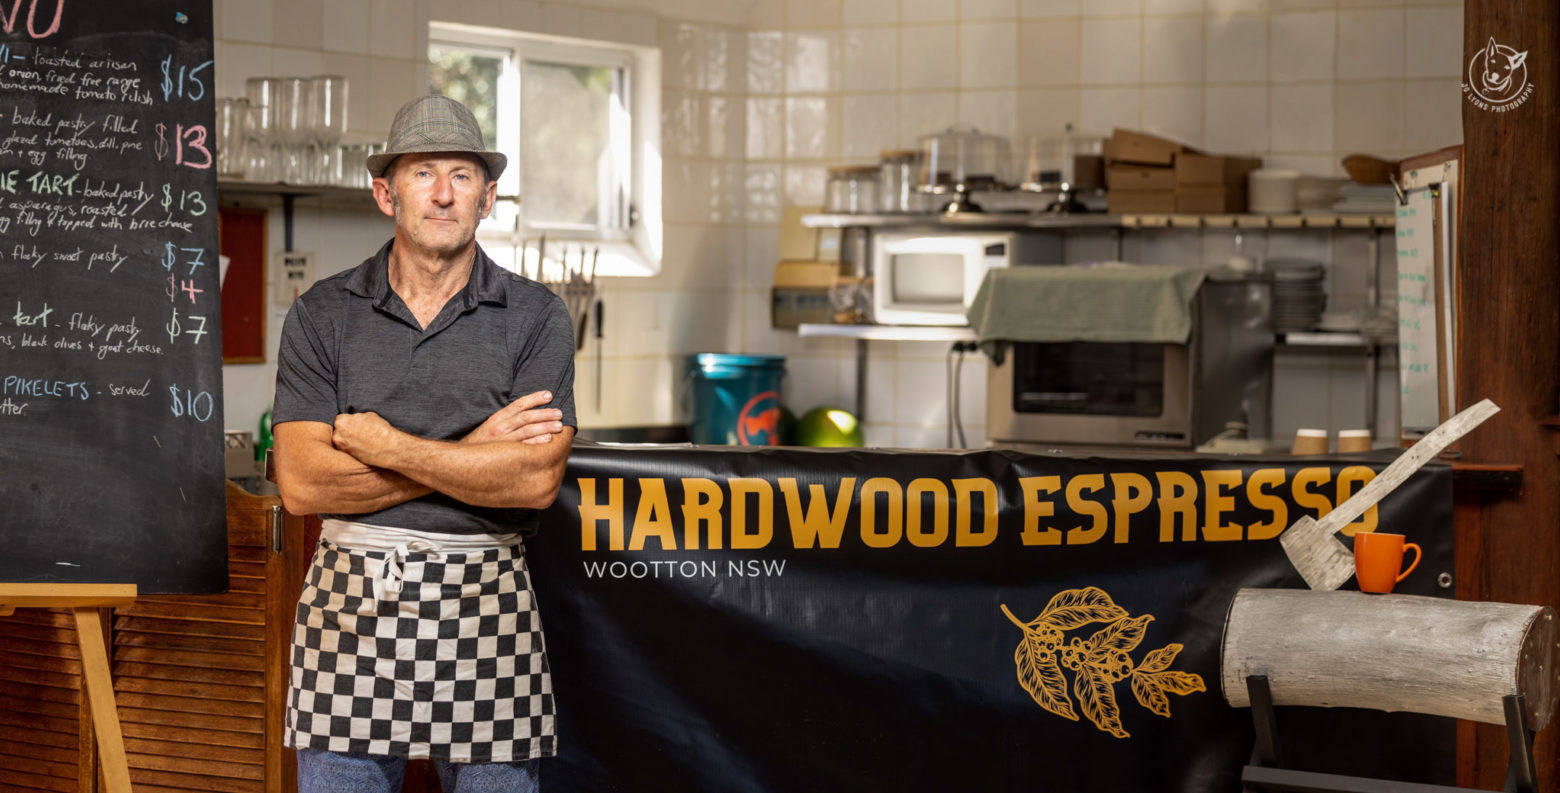 Neal Lyons, chef and owner of Hardwood Espresso in Wootton.